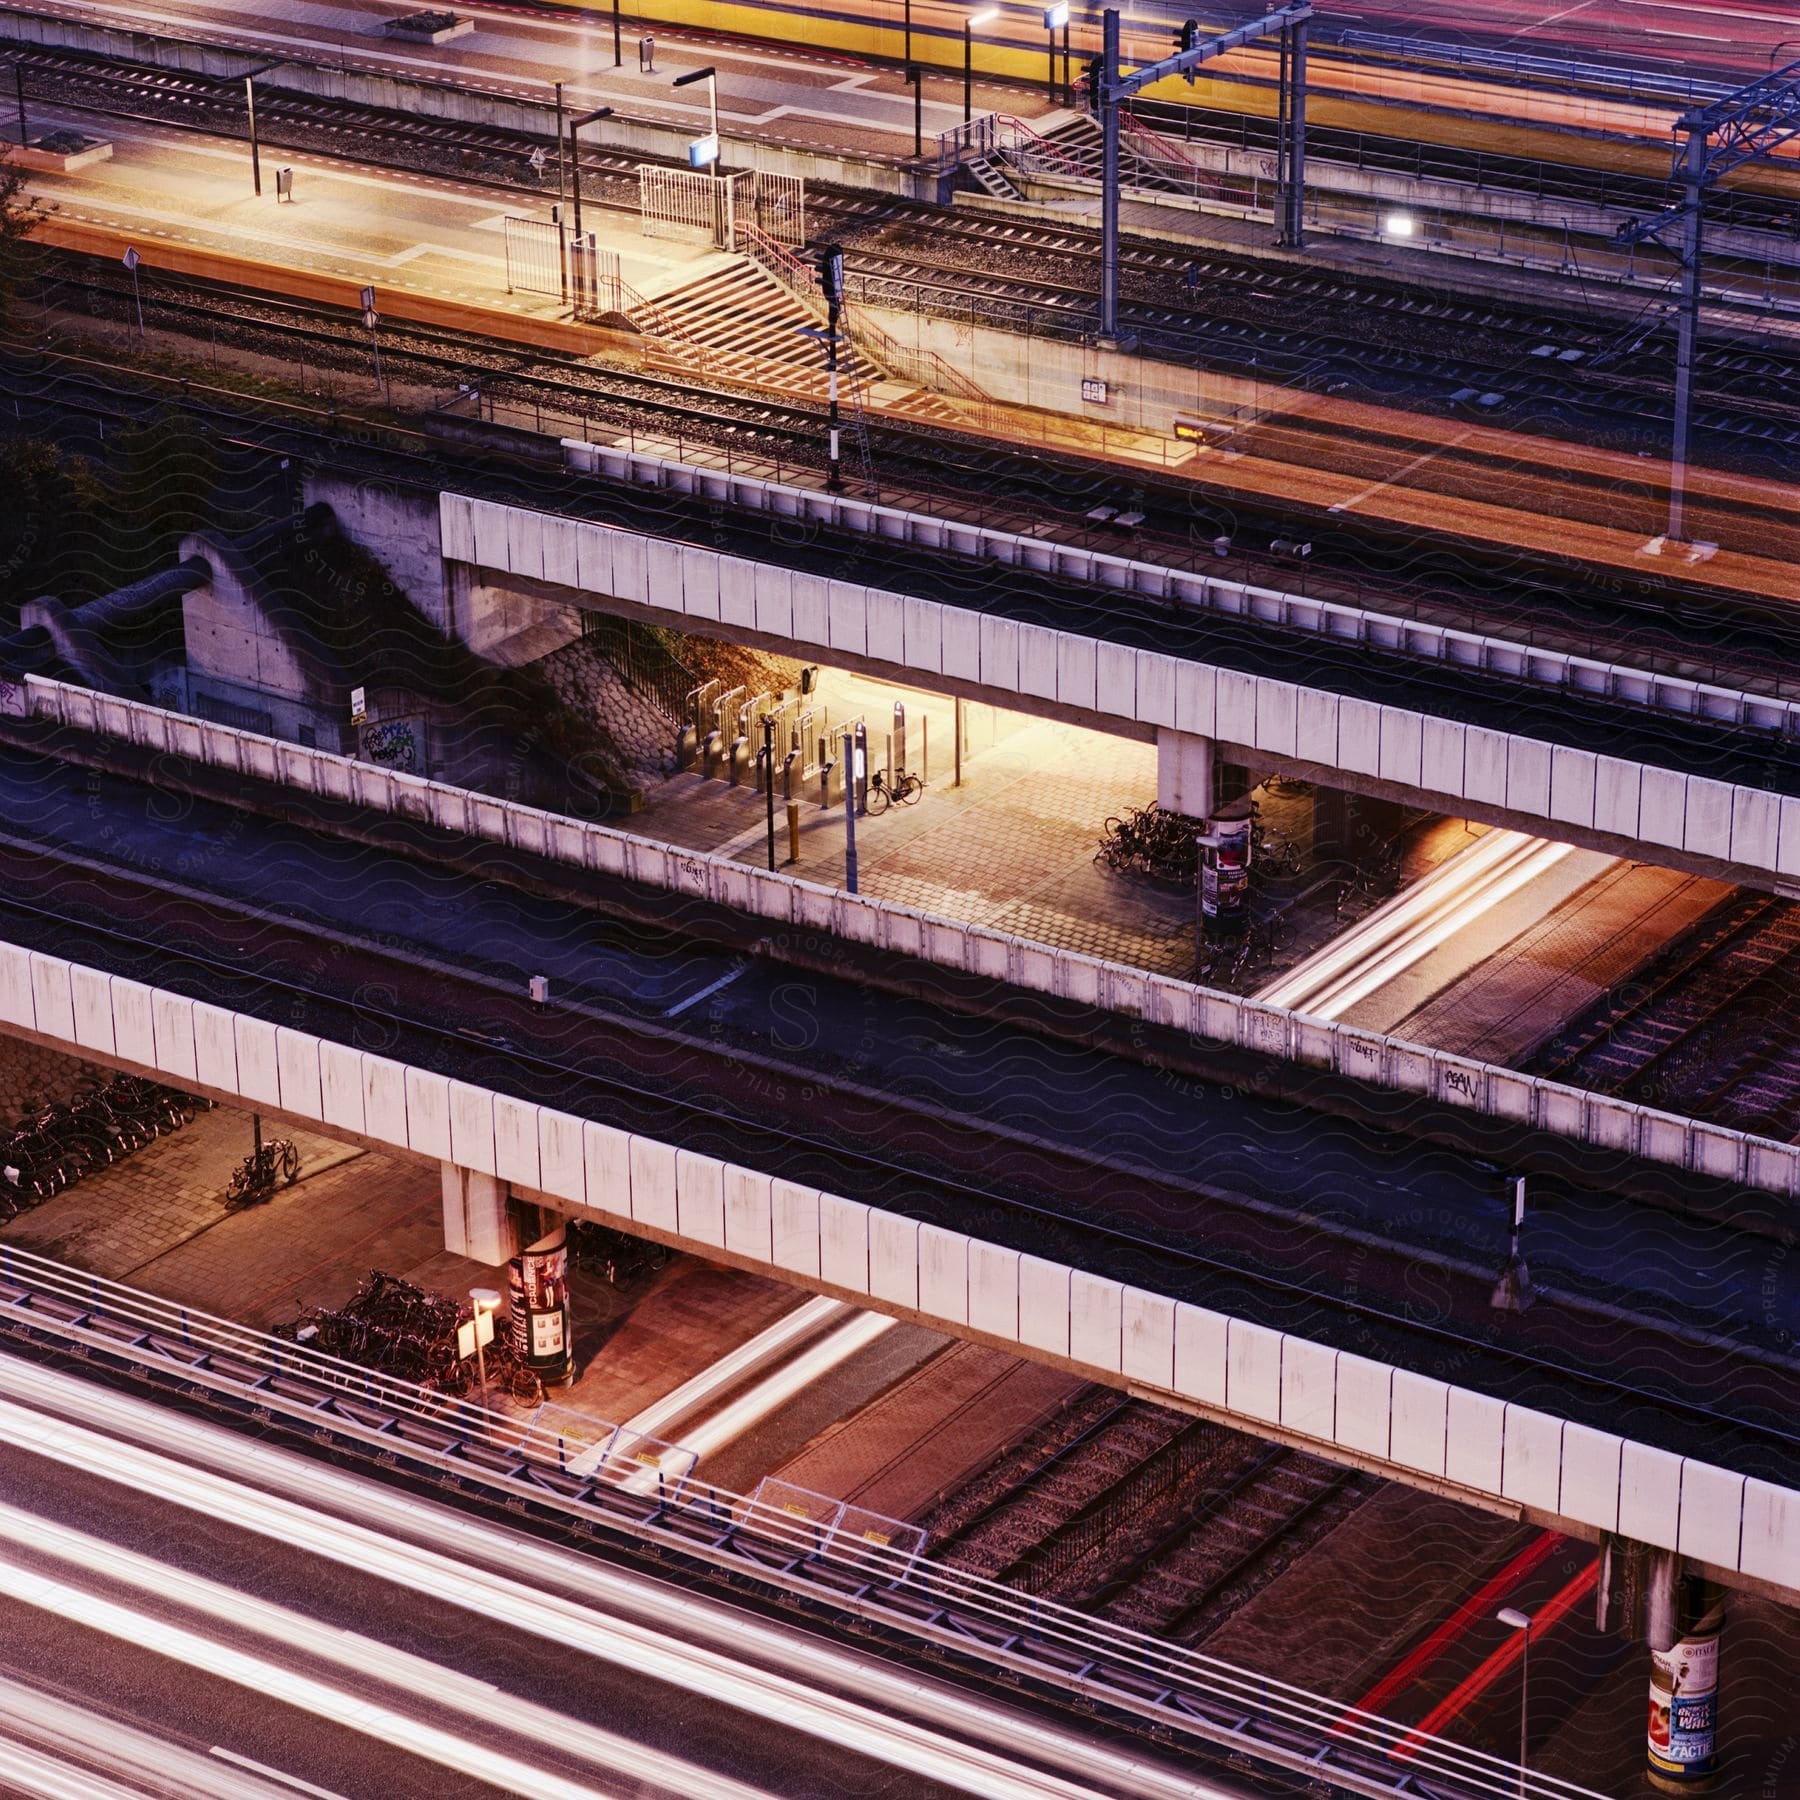 Night time view of three overpasses in a city for different modes of transportation such as a highway walkway and train tracks